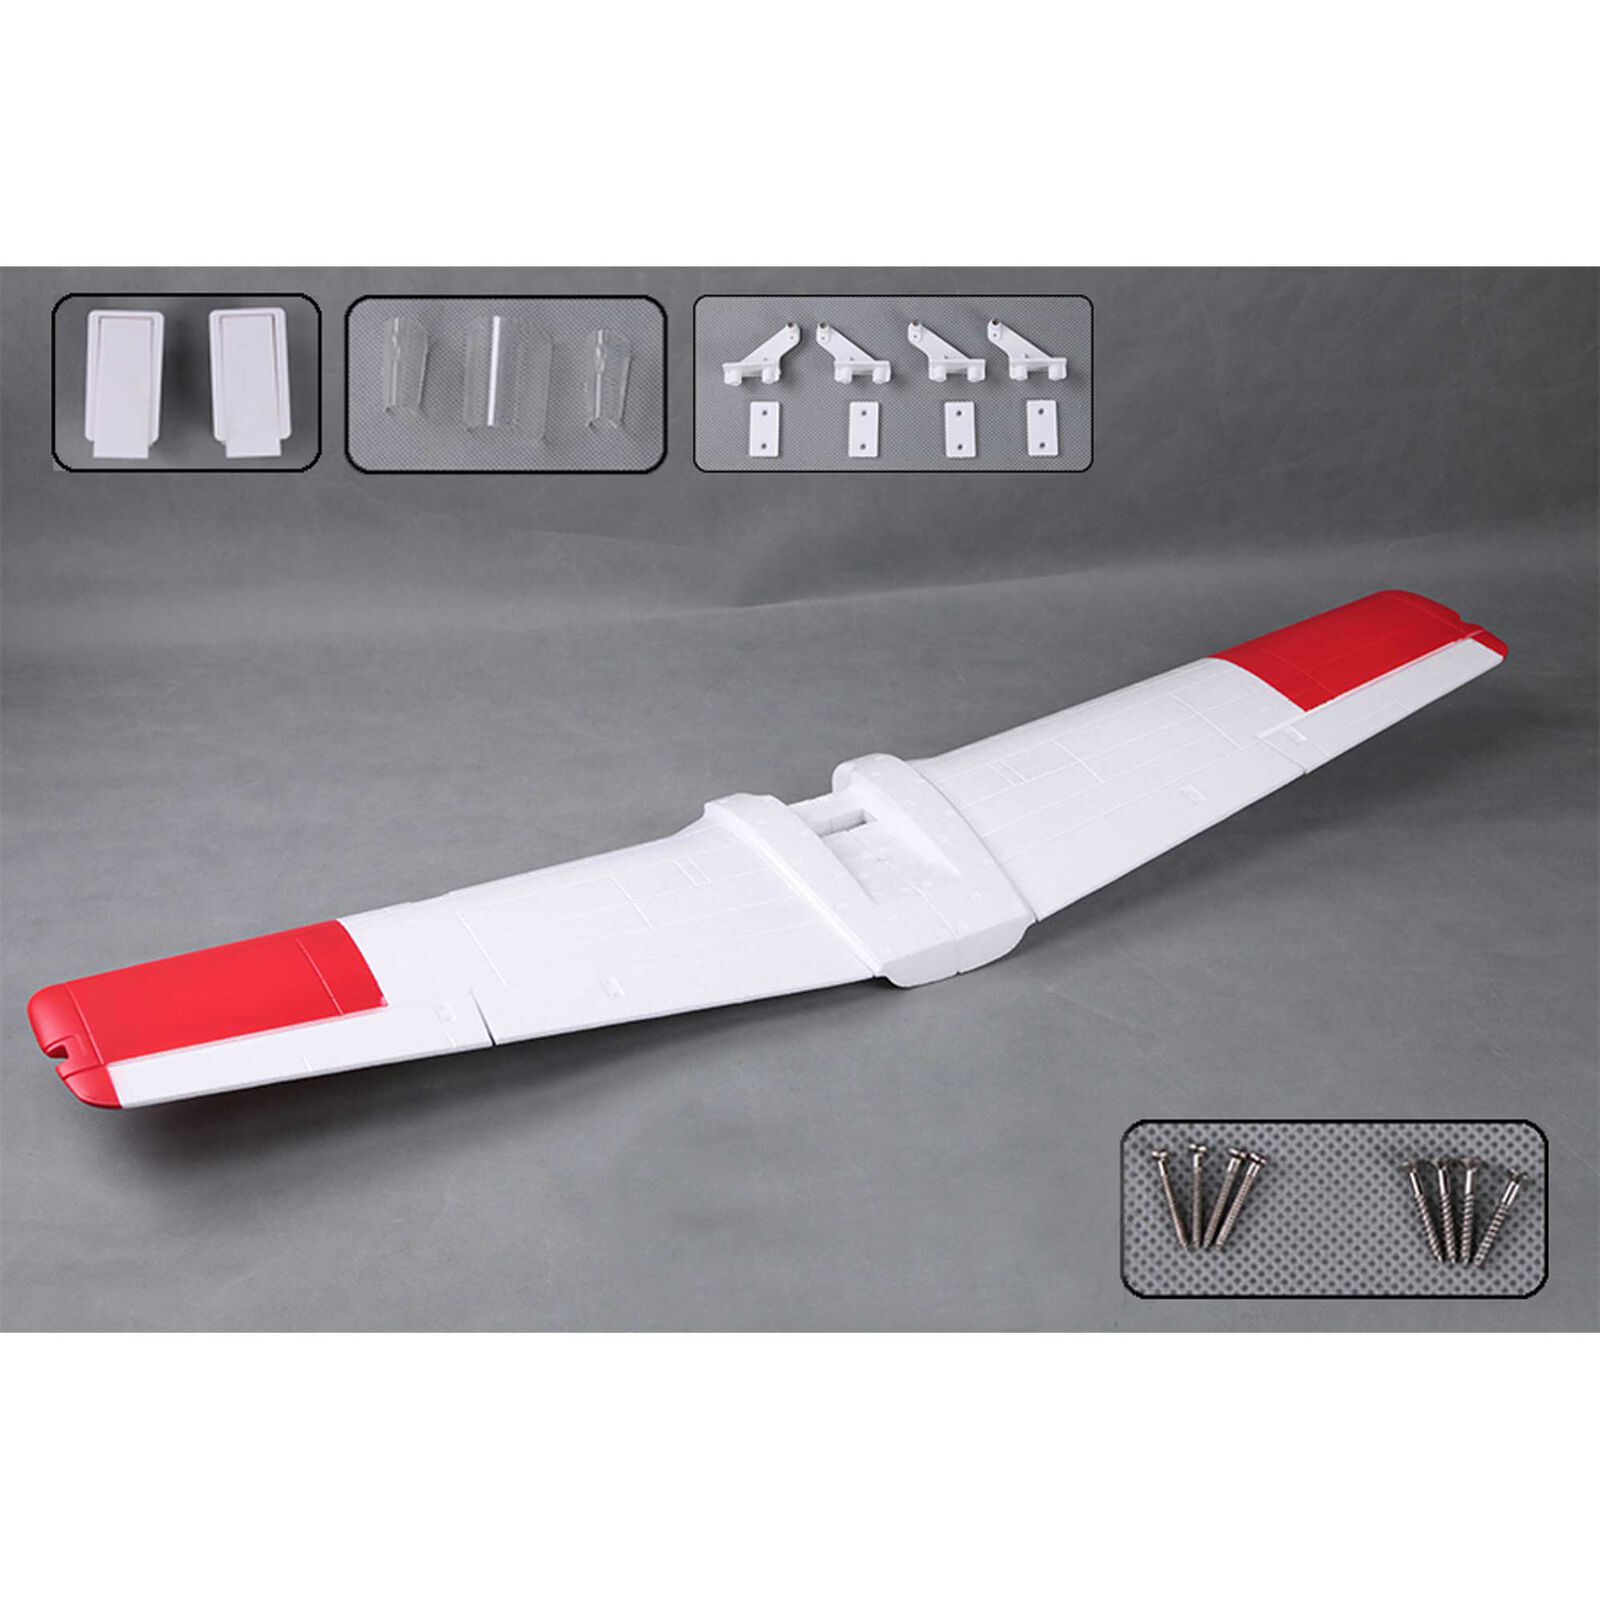 Main Wing: T28 V4 1400mm, Red